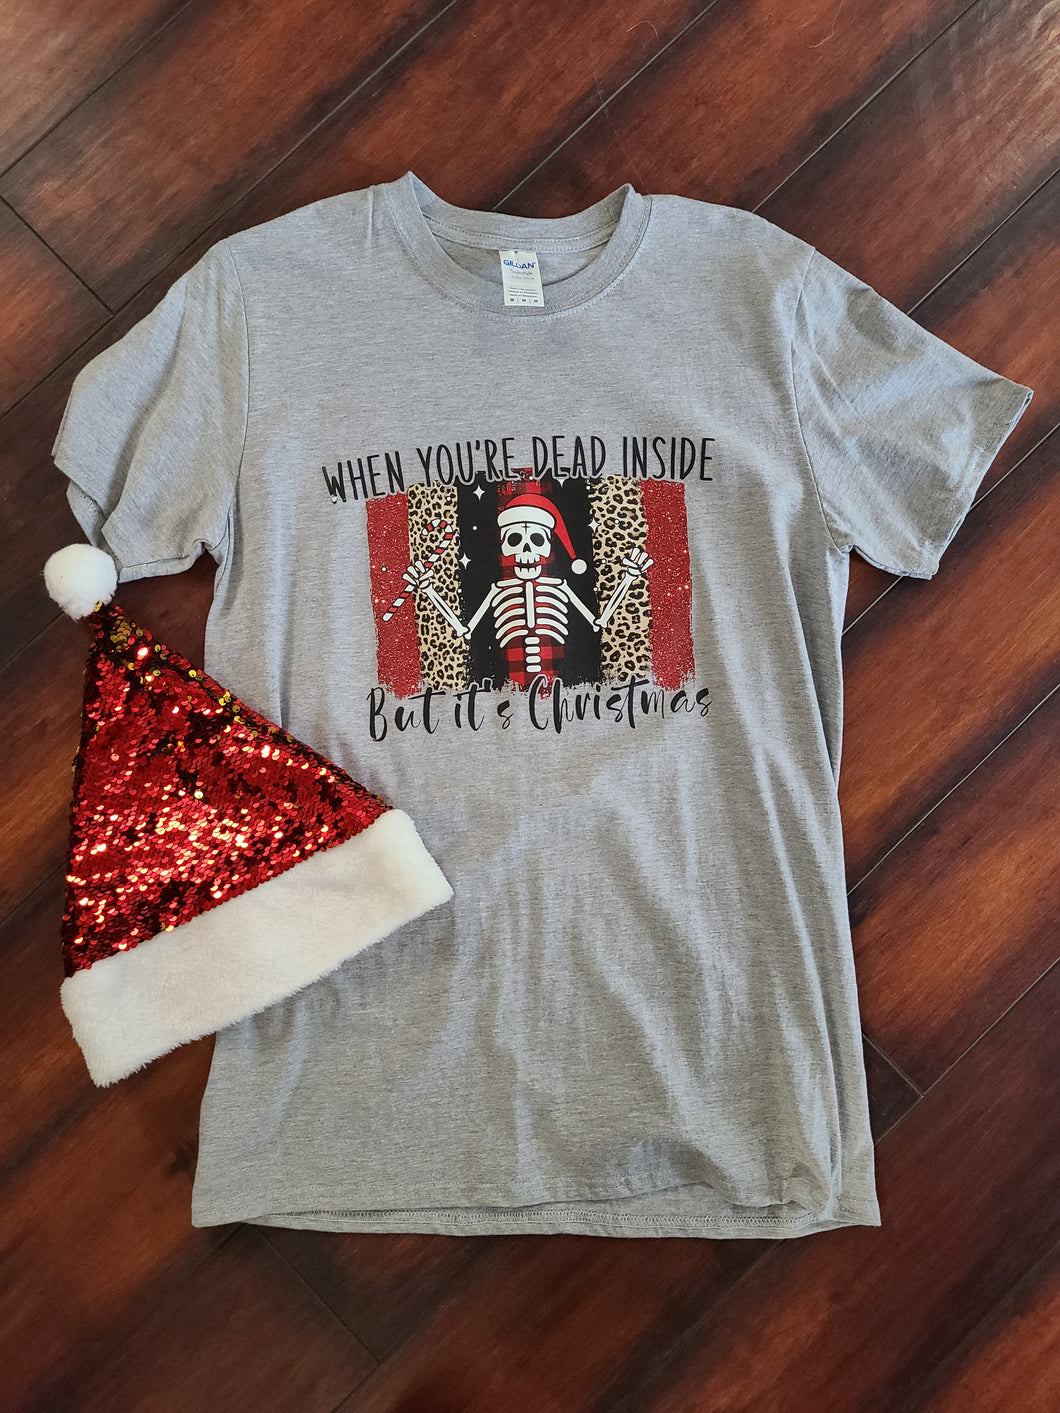 When you're dead inside but it's Christmas- Christmas shirt!